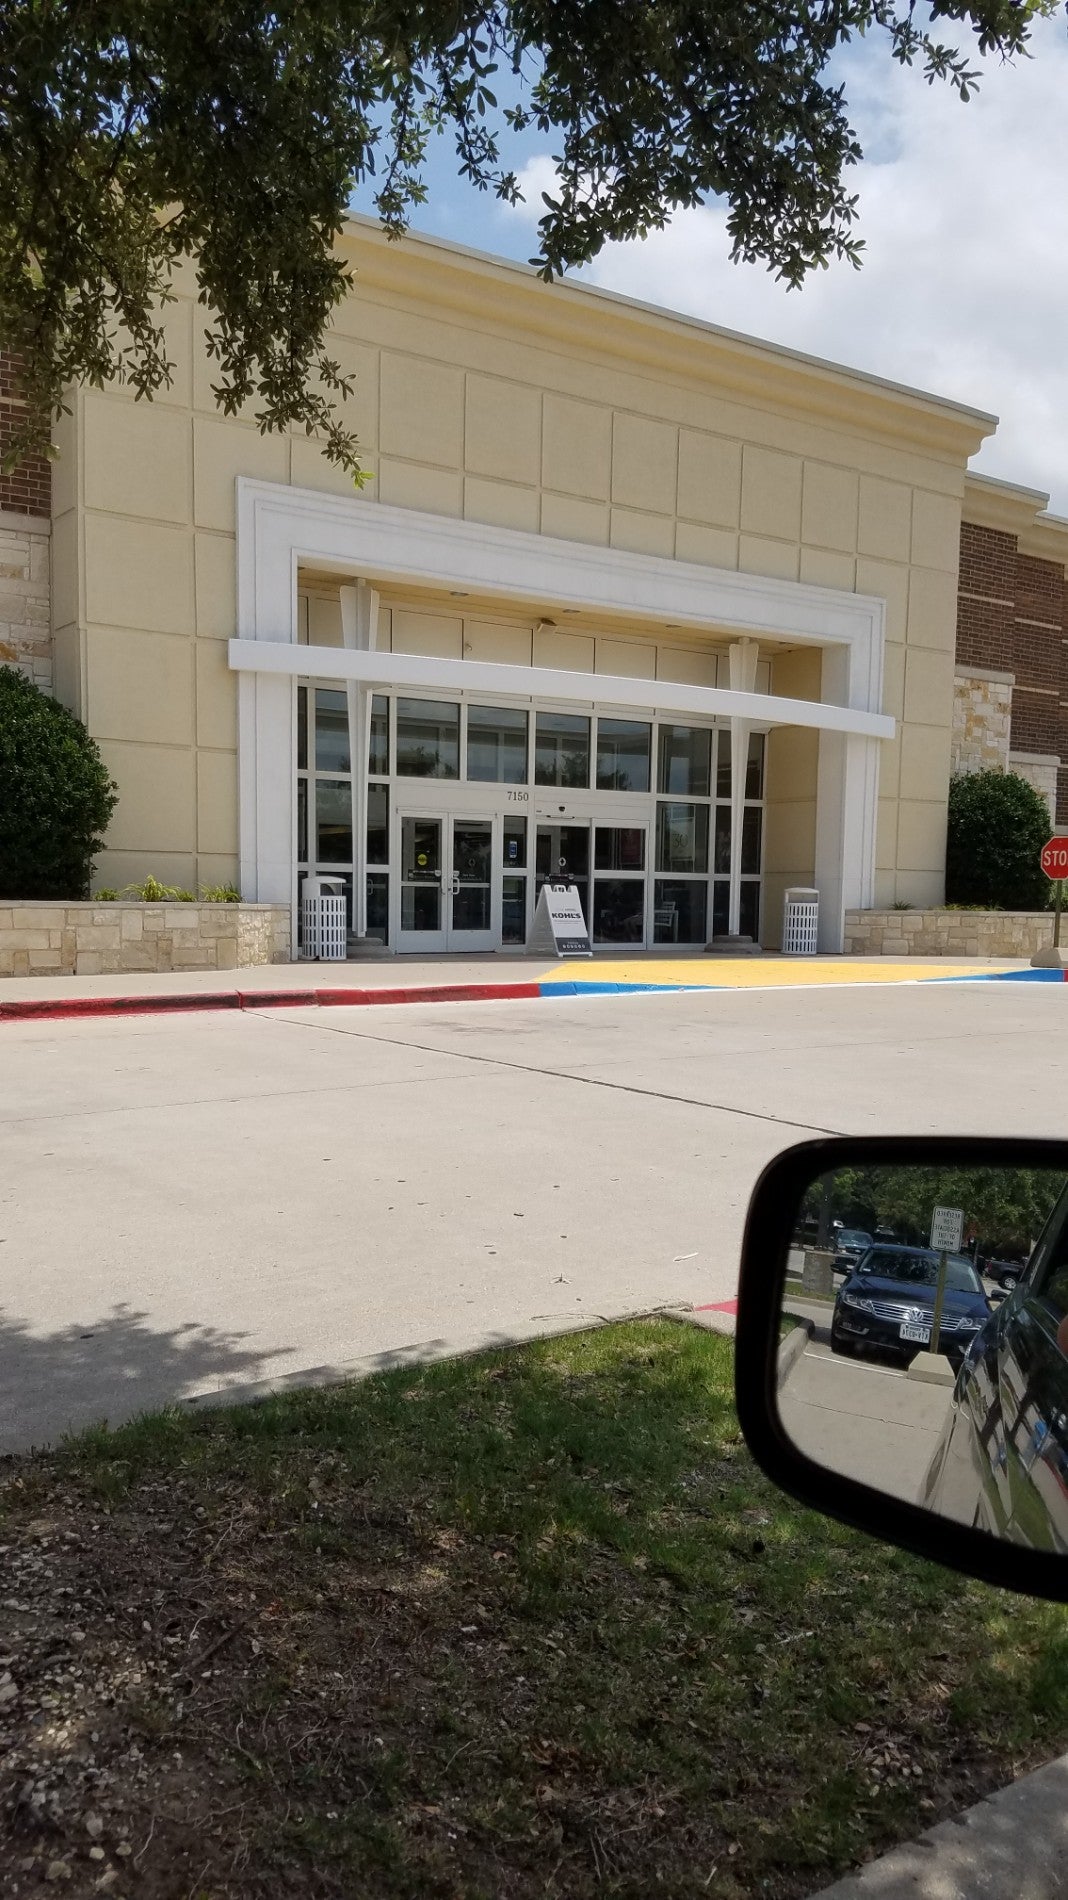 KOHL'S - 22 Photos & 39 Reviews - 18224 Preston Rd, Dallas, Texas -  Department Stores - Phone Number - Yelp